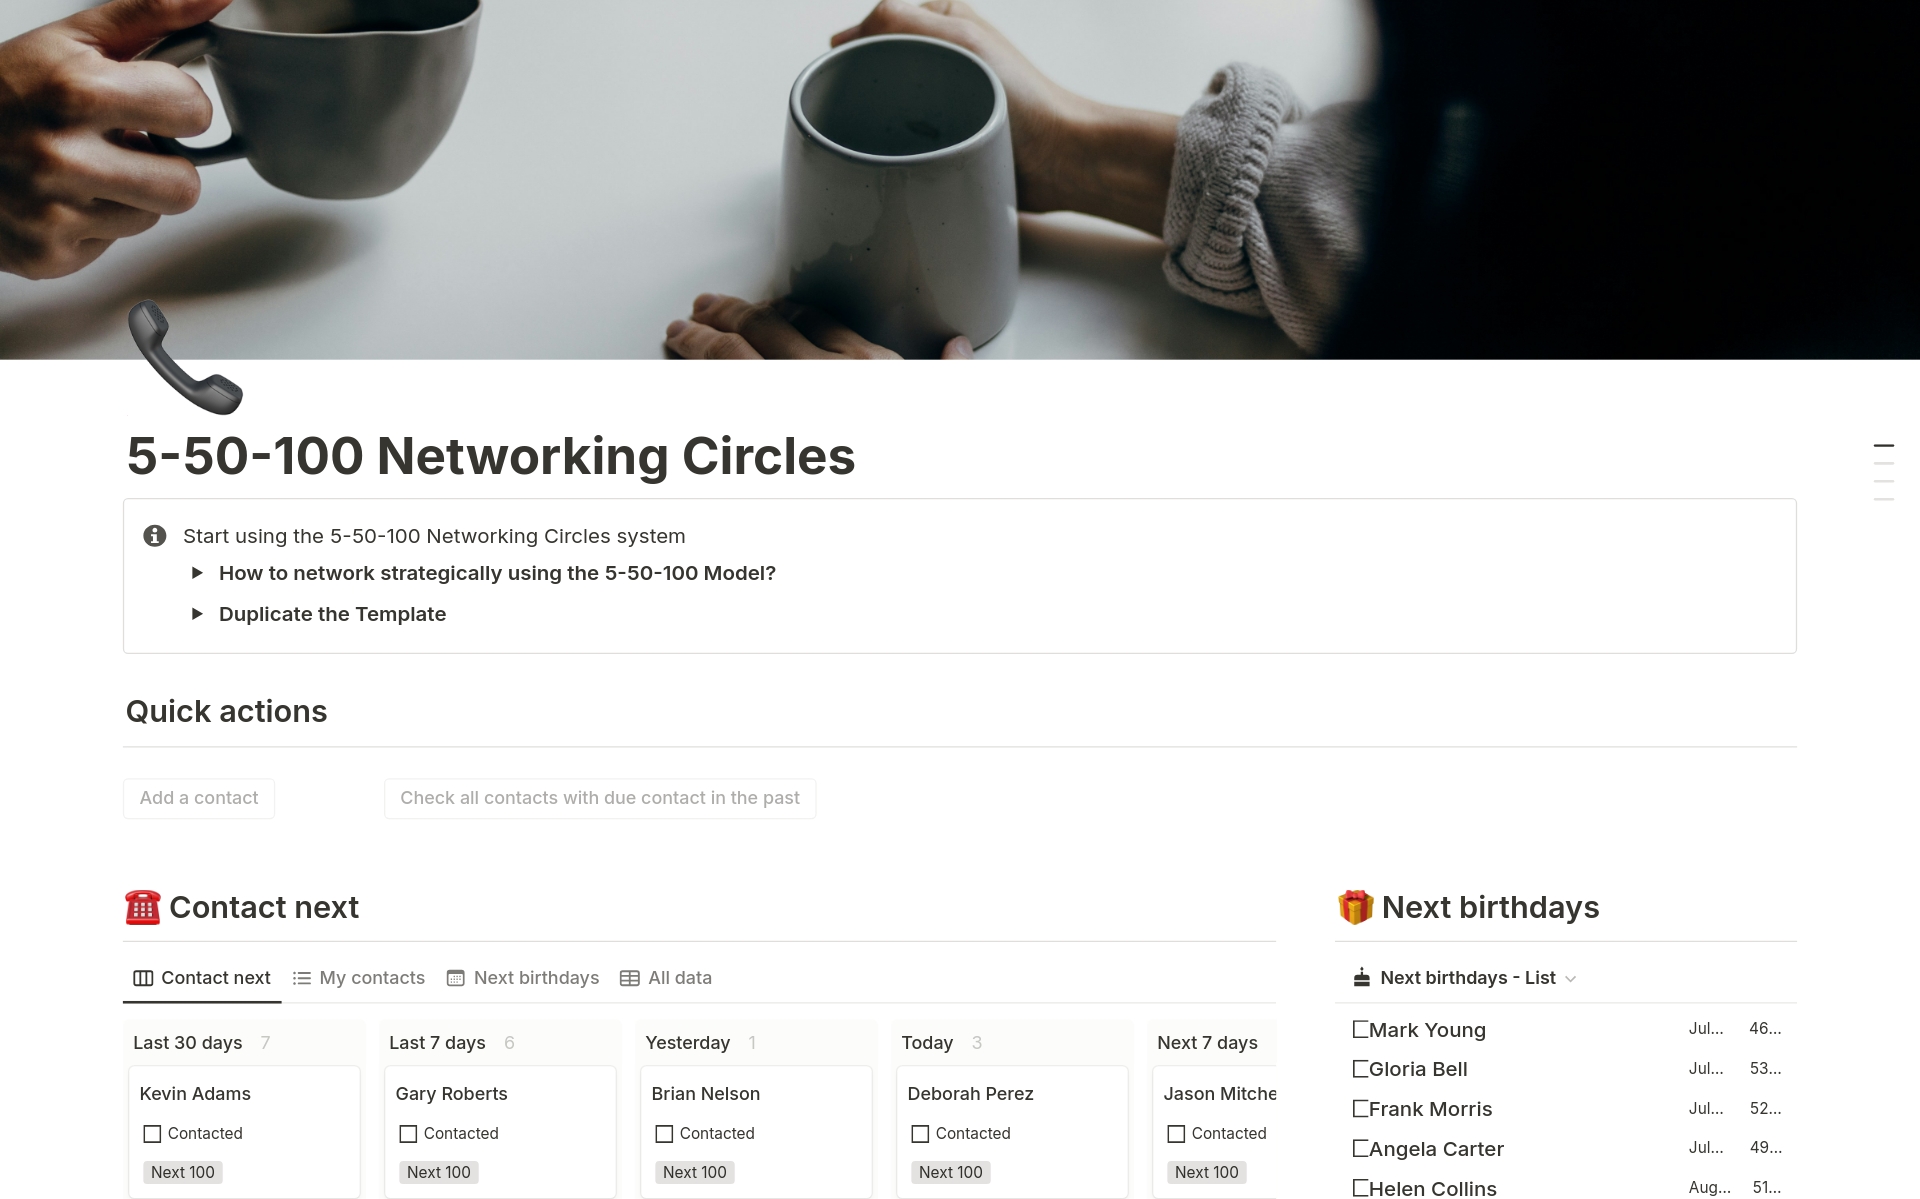 Optimize your networking with the 5-50-100 Networking Circles template. Categorize contacts into three circles: Top 5 (weekly), Key 50 (monthly), and Next 100 (quarterly). Stay connected, remember important details, and nurture meaningful relationships efficiently.